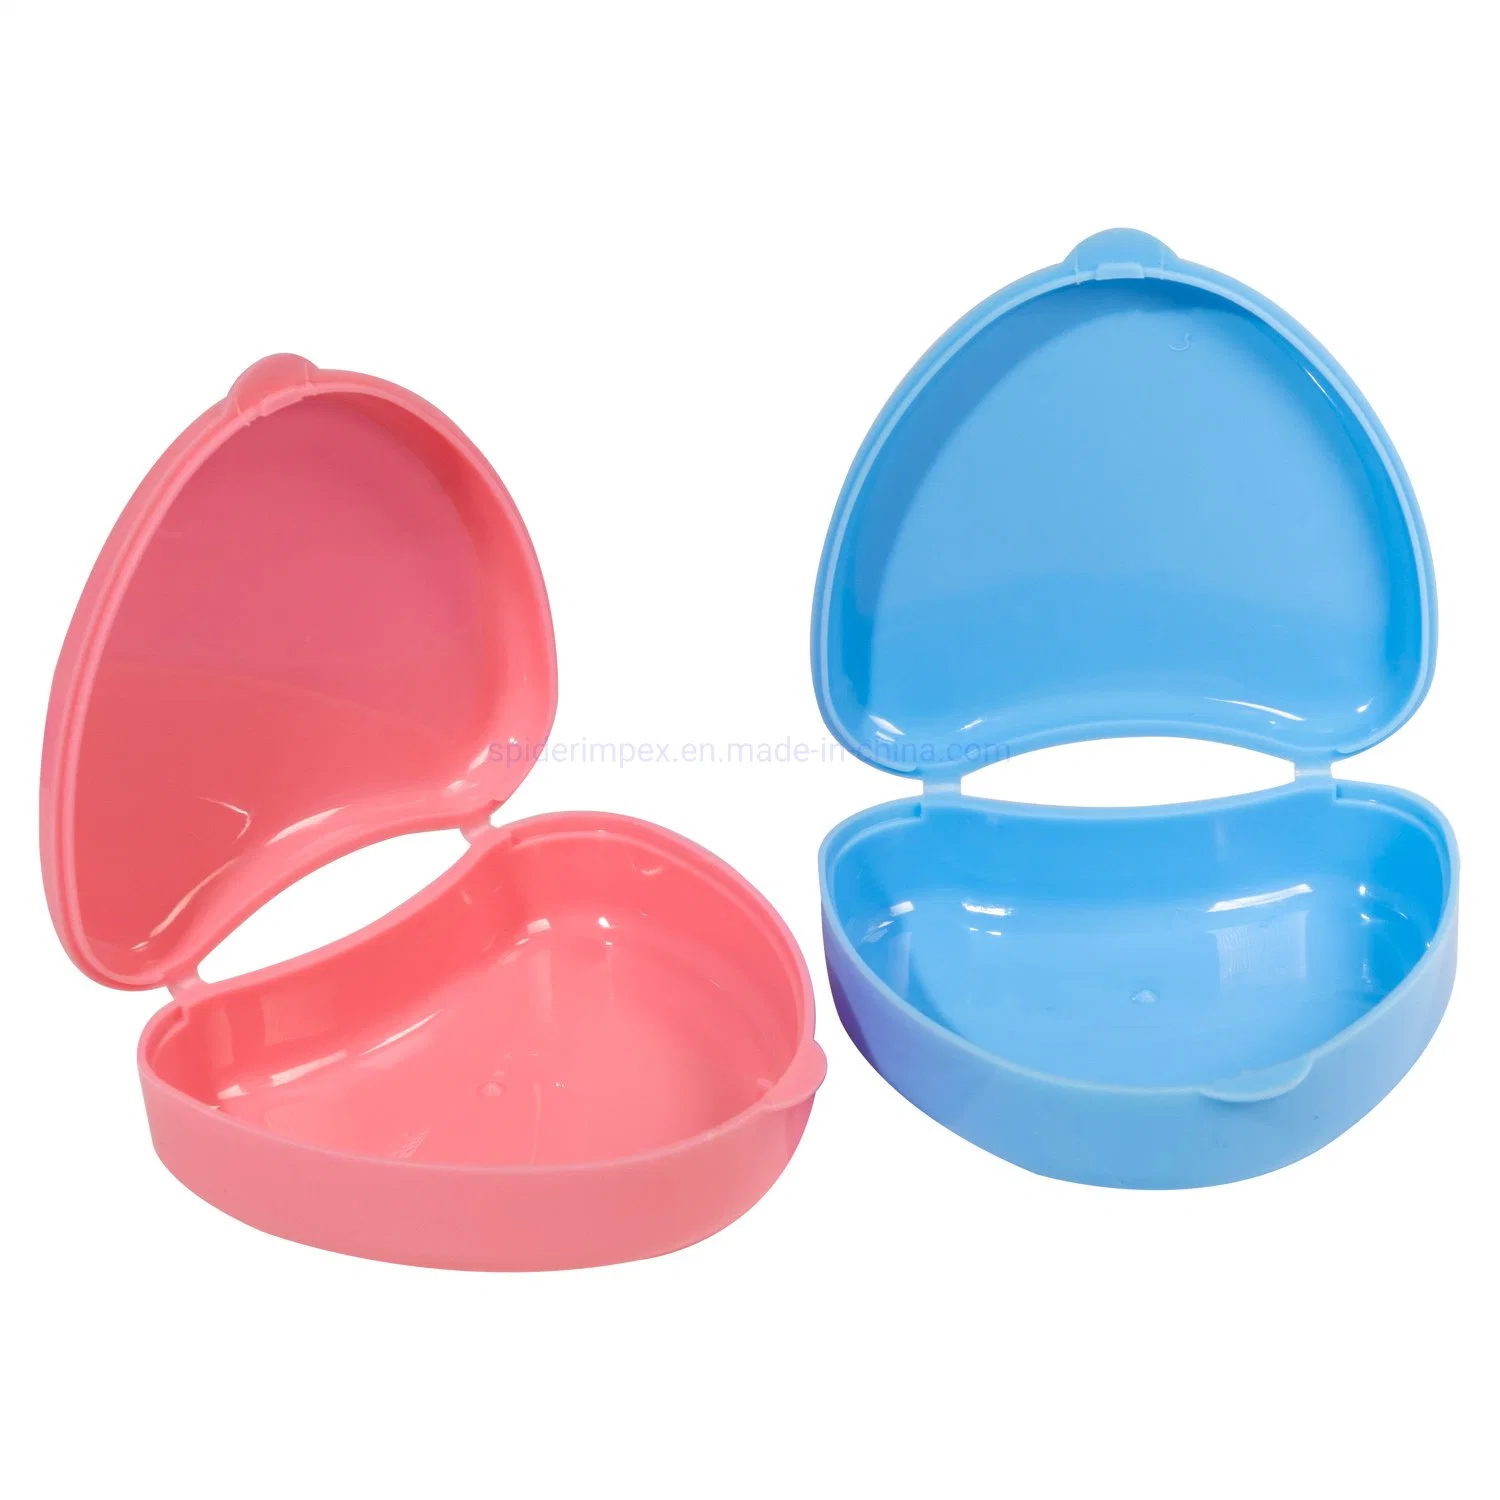 Hot-Selling Convenient Small Heart-Shaped Dental Orthodontic Retainer Aligner Case for Travel